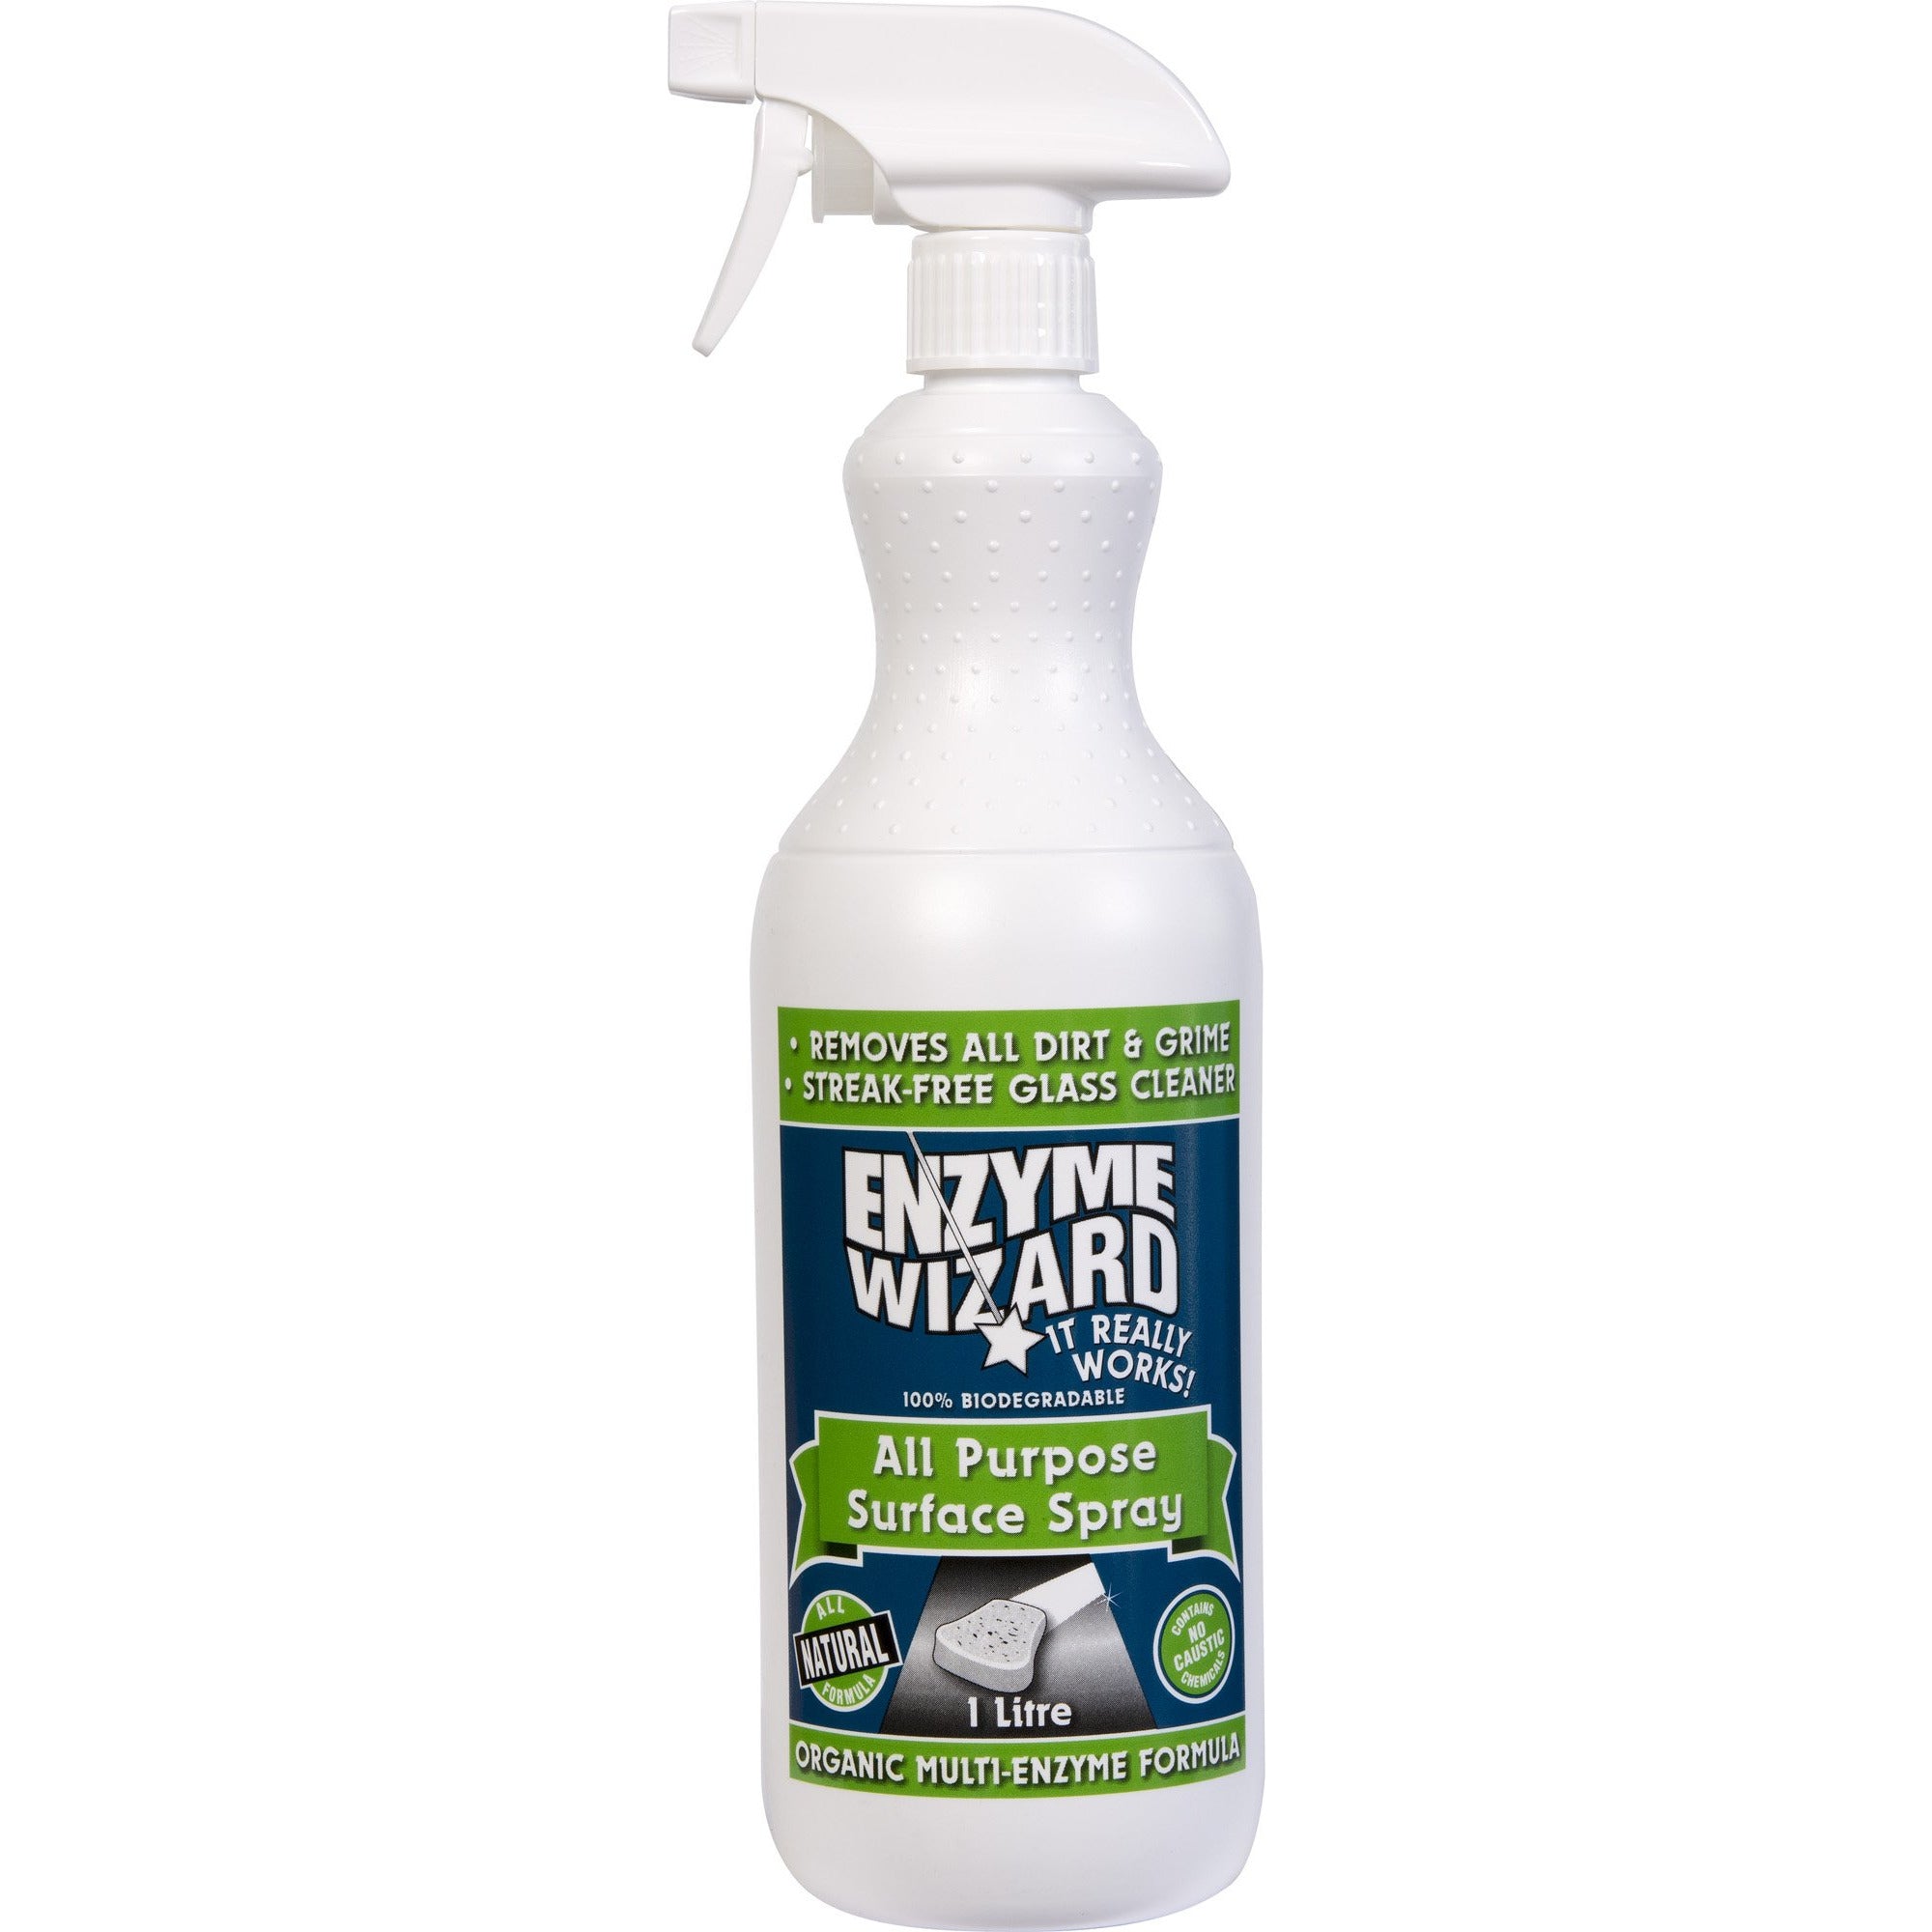 ENZYME WIZARD ALL PURPOSE SURFACE SPRAY 1 LITRE